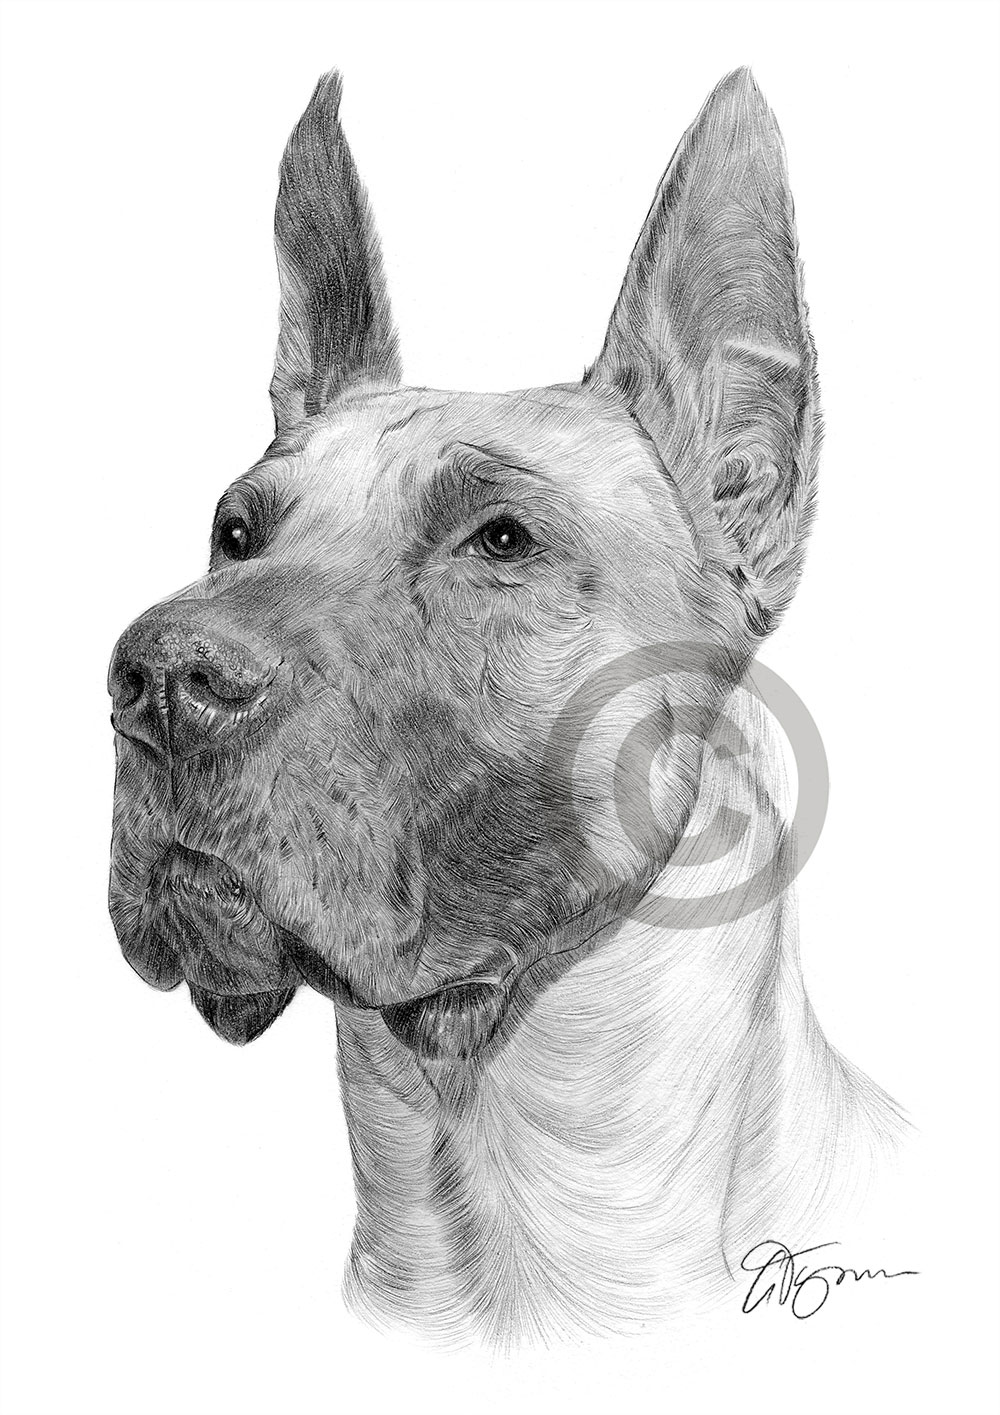 Pencil drawing of an adult Great Dane by UK artist Gary Tymon